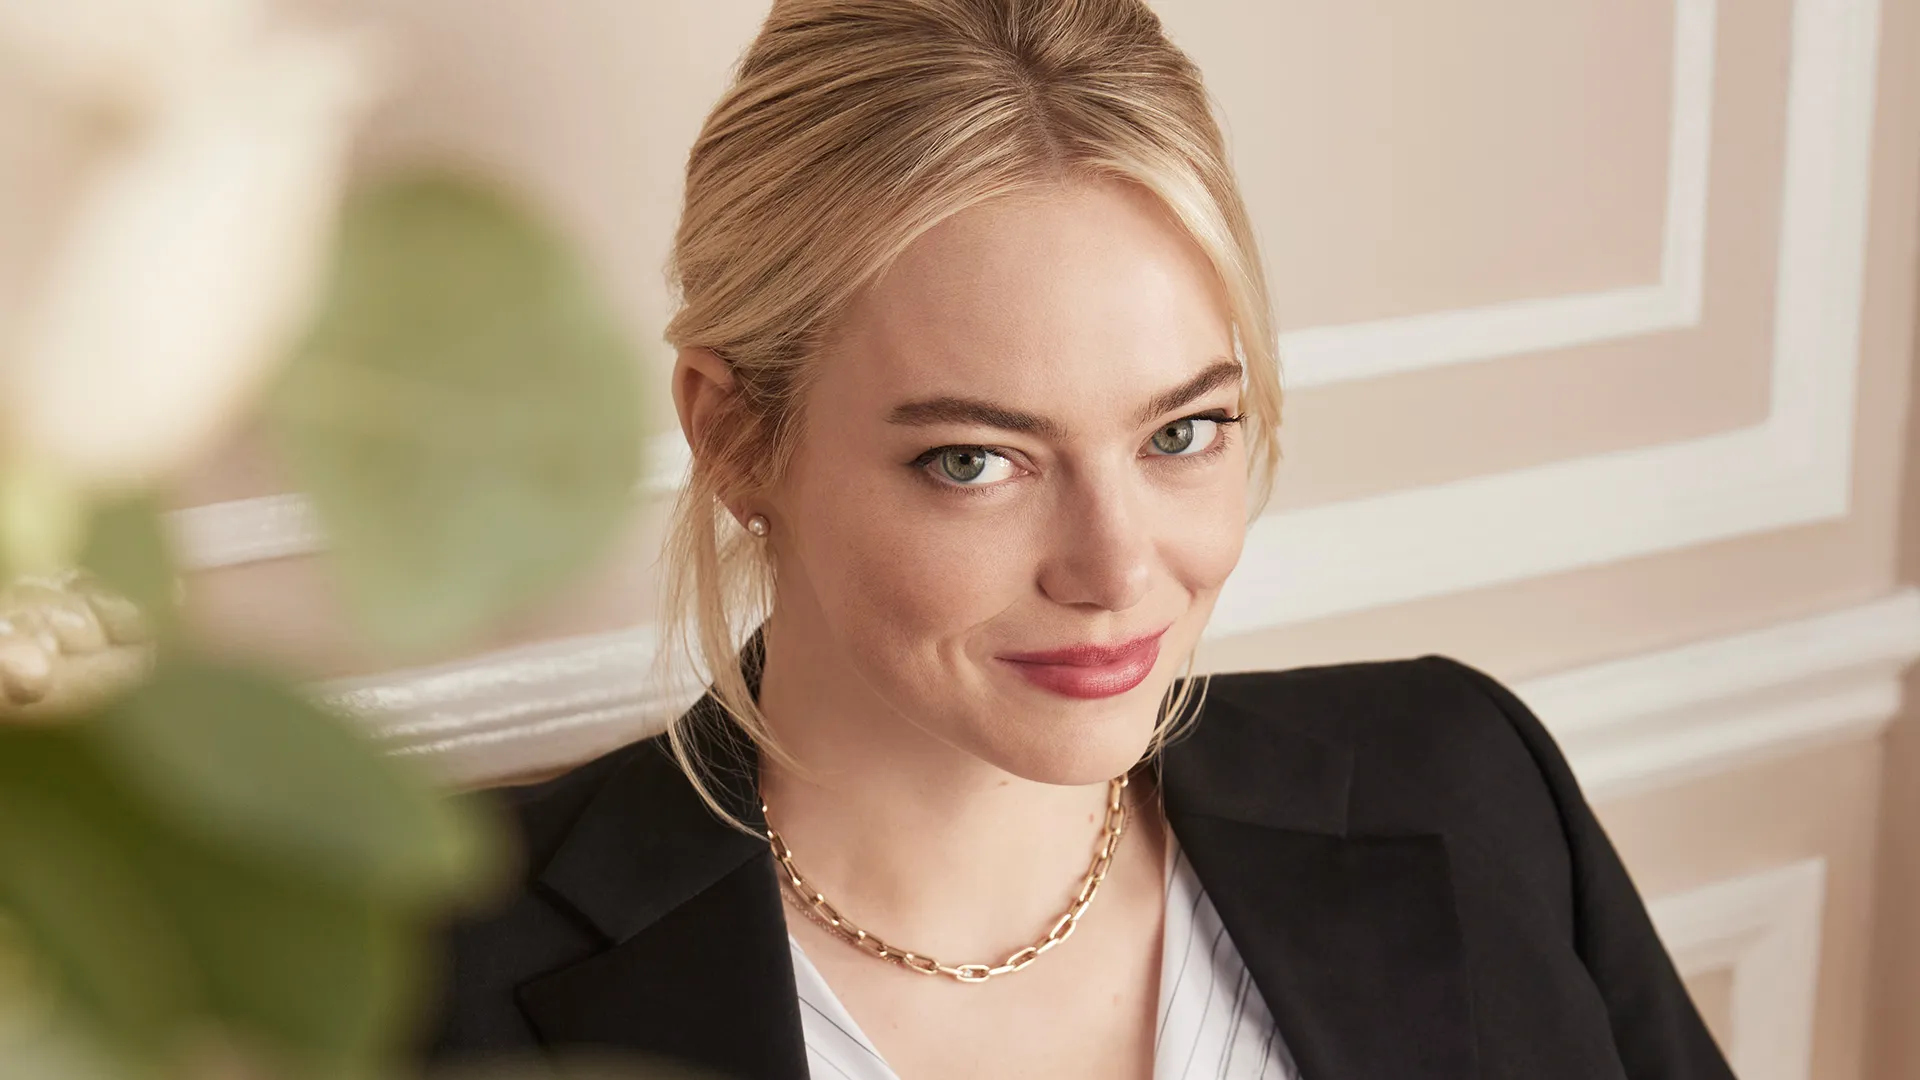 Emma Stone’s Quest To Get On ‘Jeopardy!’ Revealed